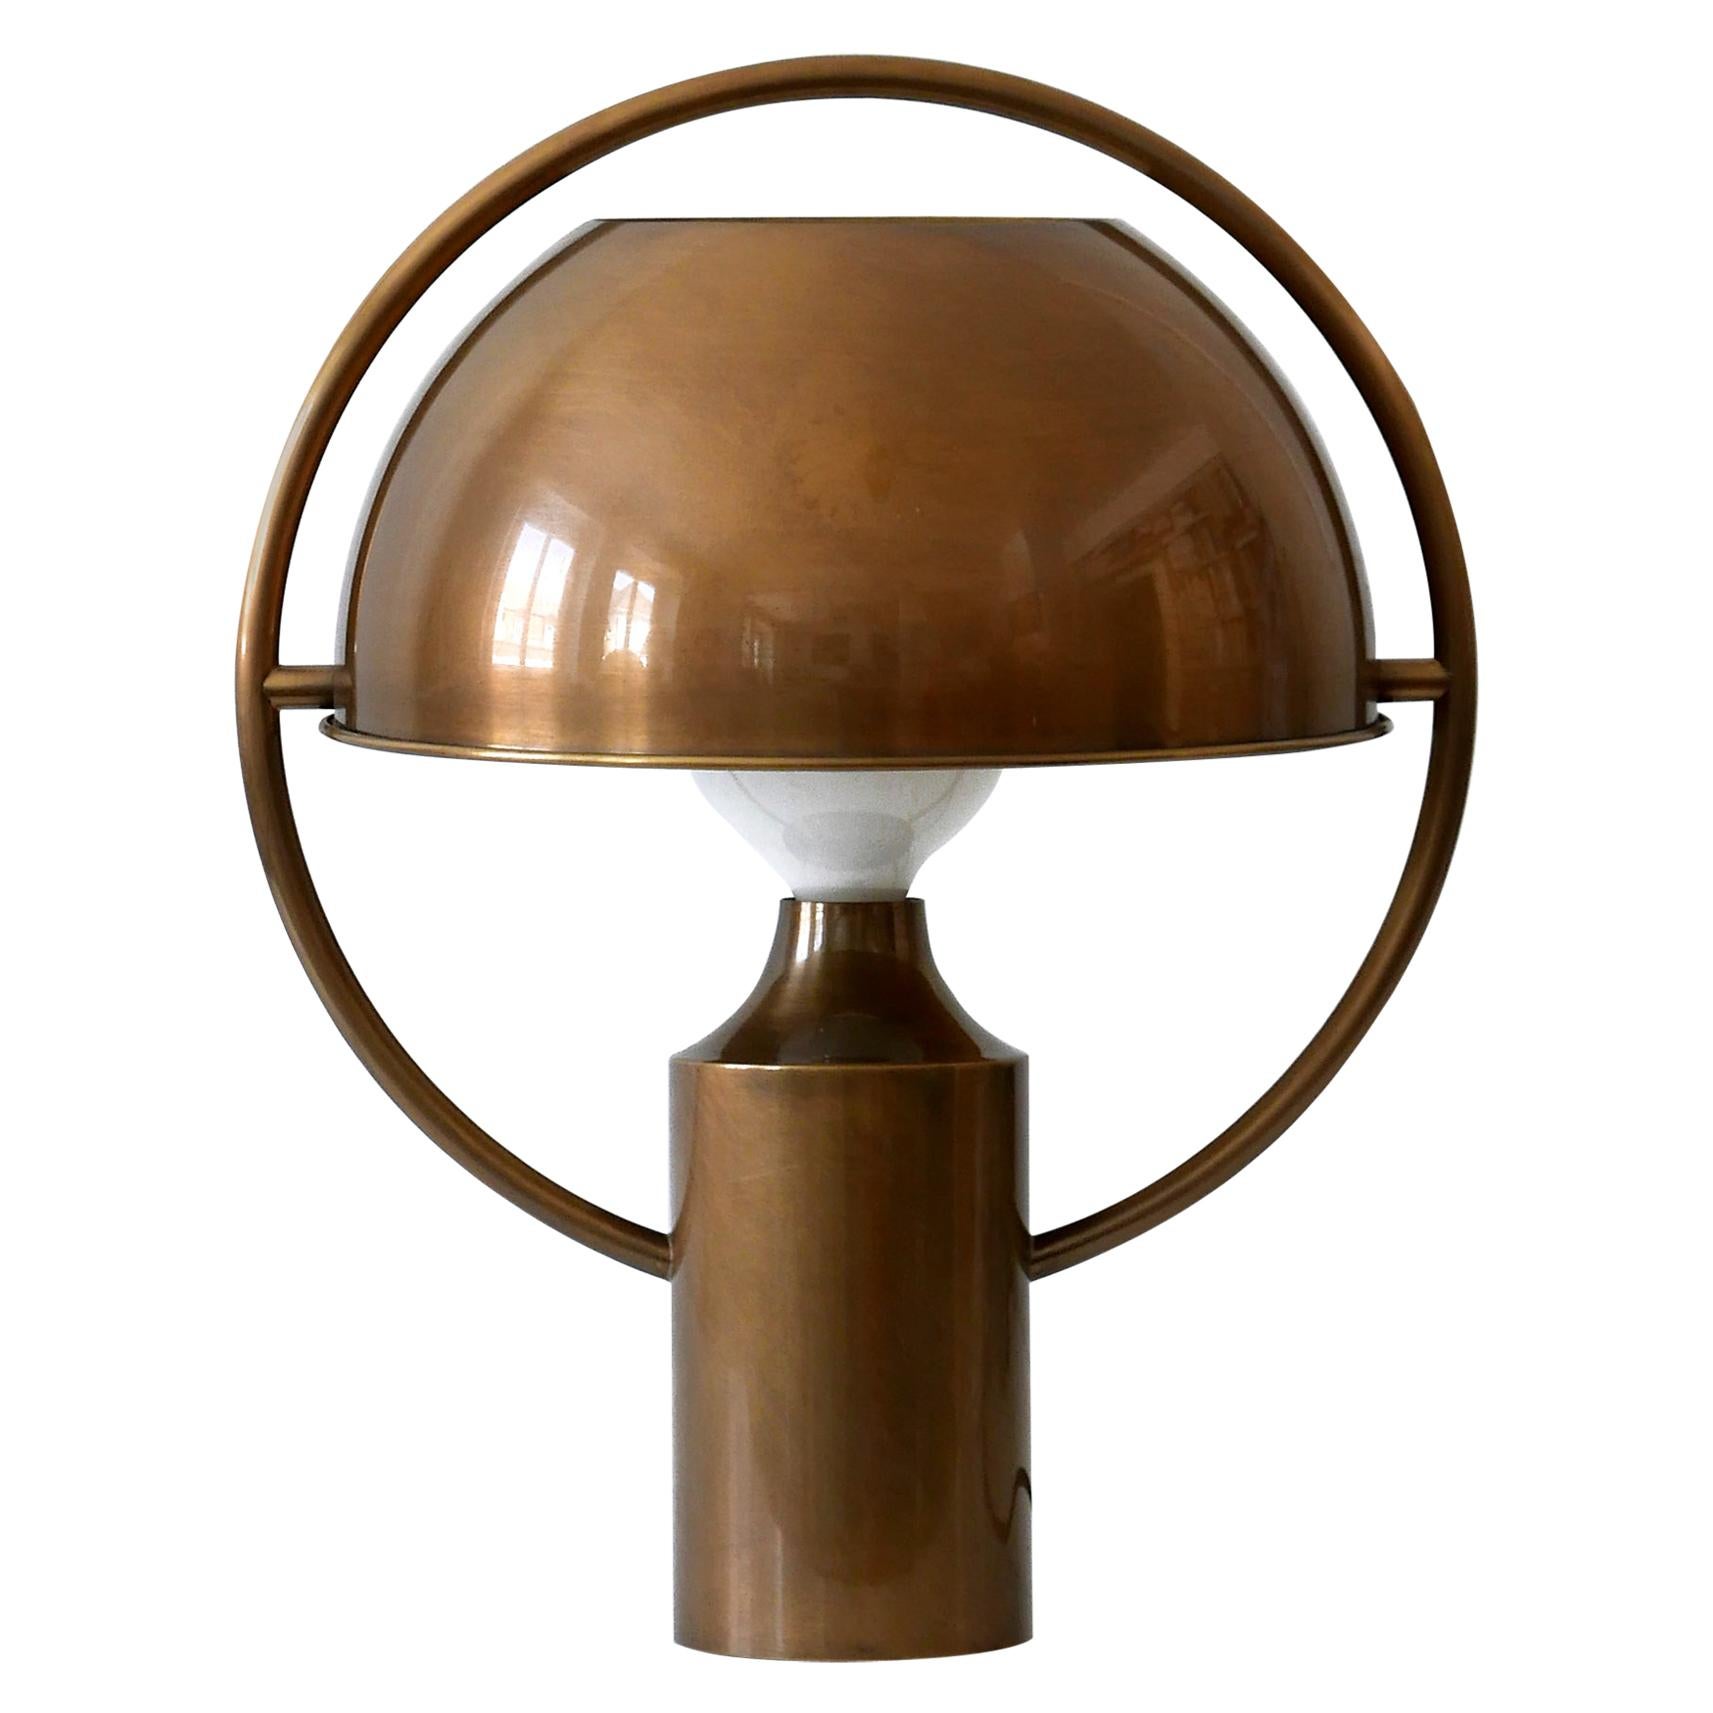 Extremely Rare Mid-Century Modern Table Lamp by Florian Schulz Germany 1970s